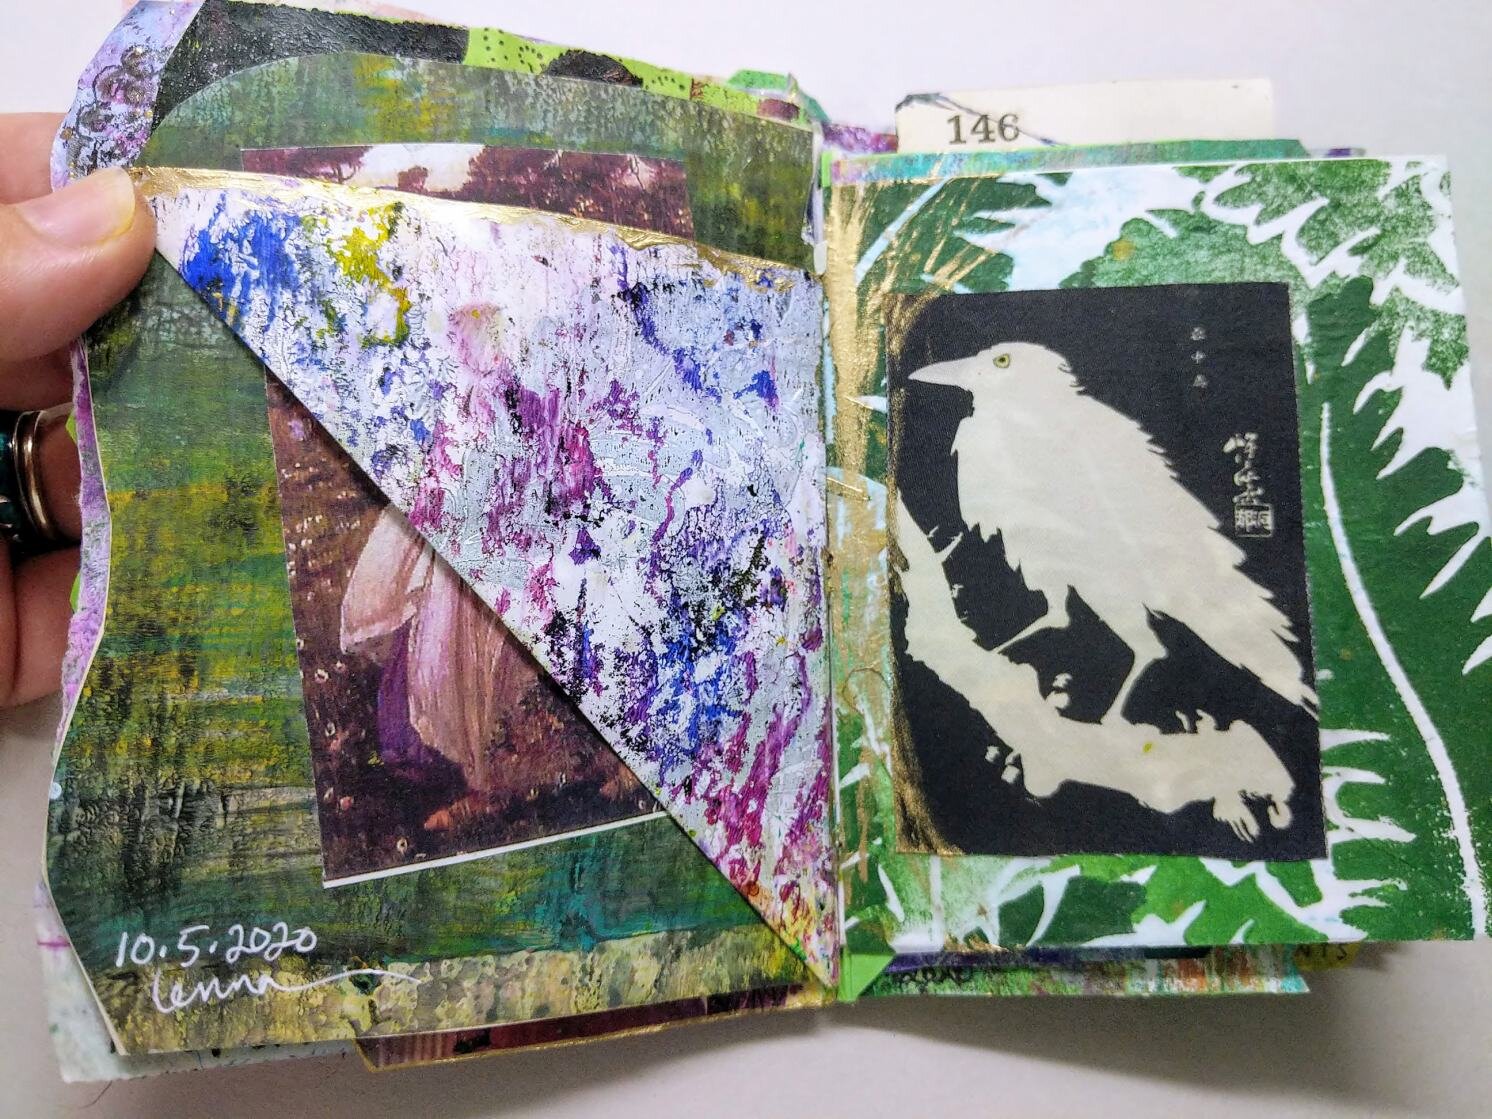 Gelli Printing: Is it really all it's cracked up to be? – Cry The Bird